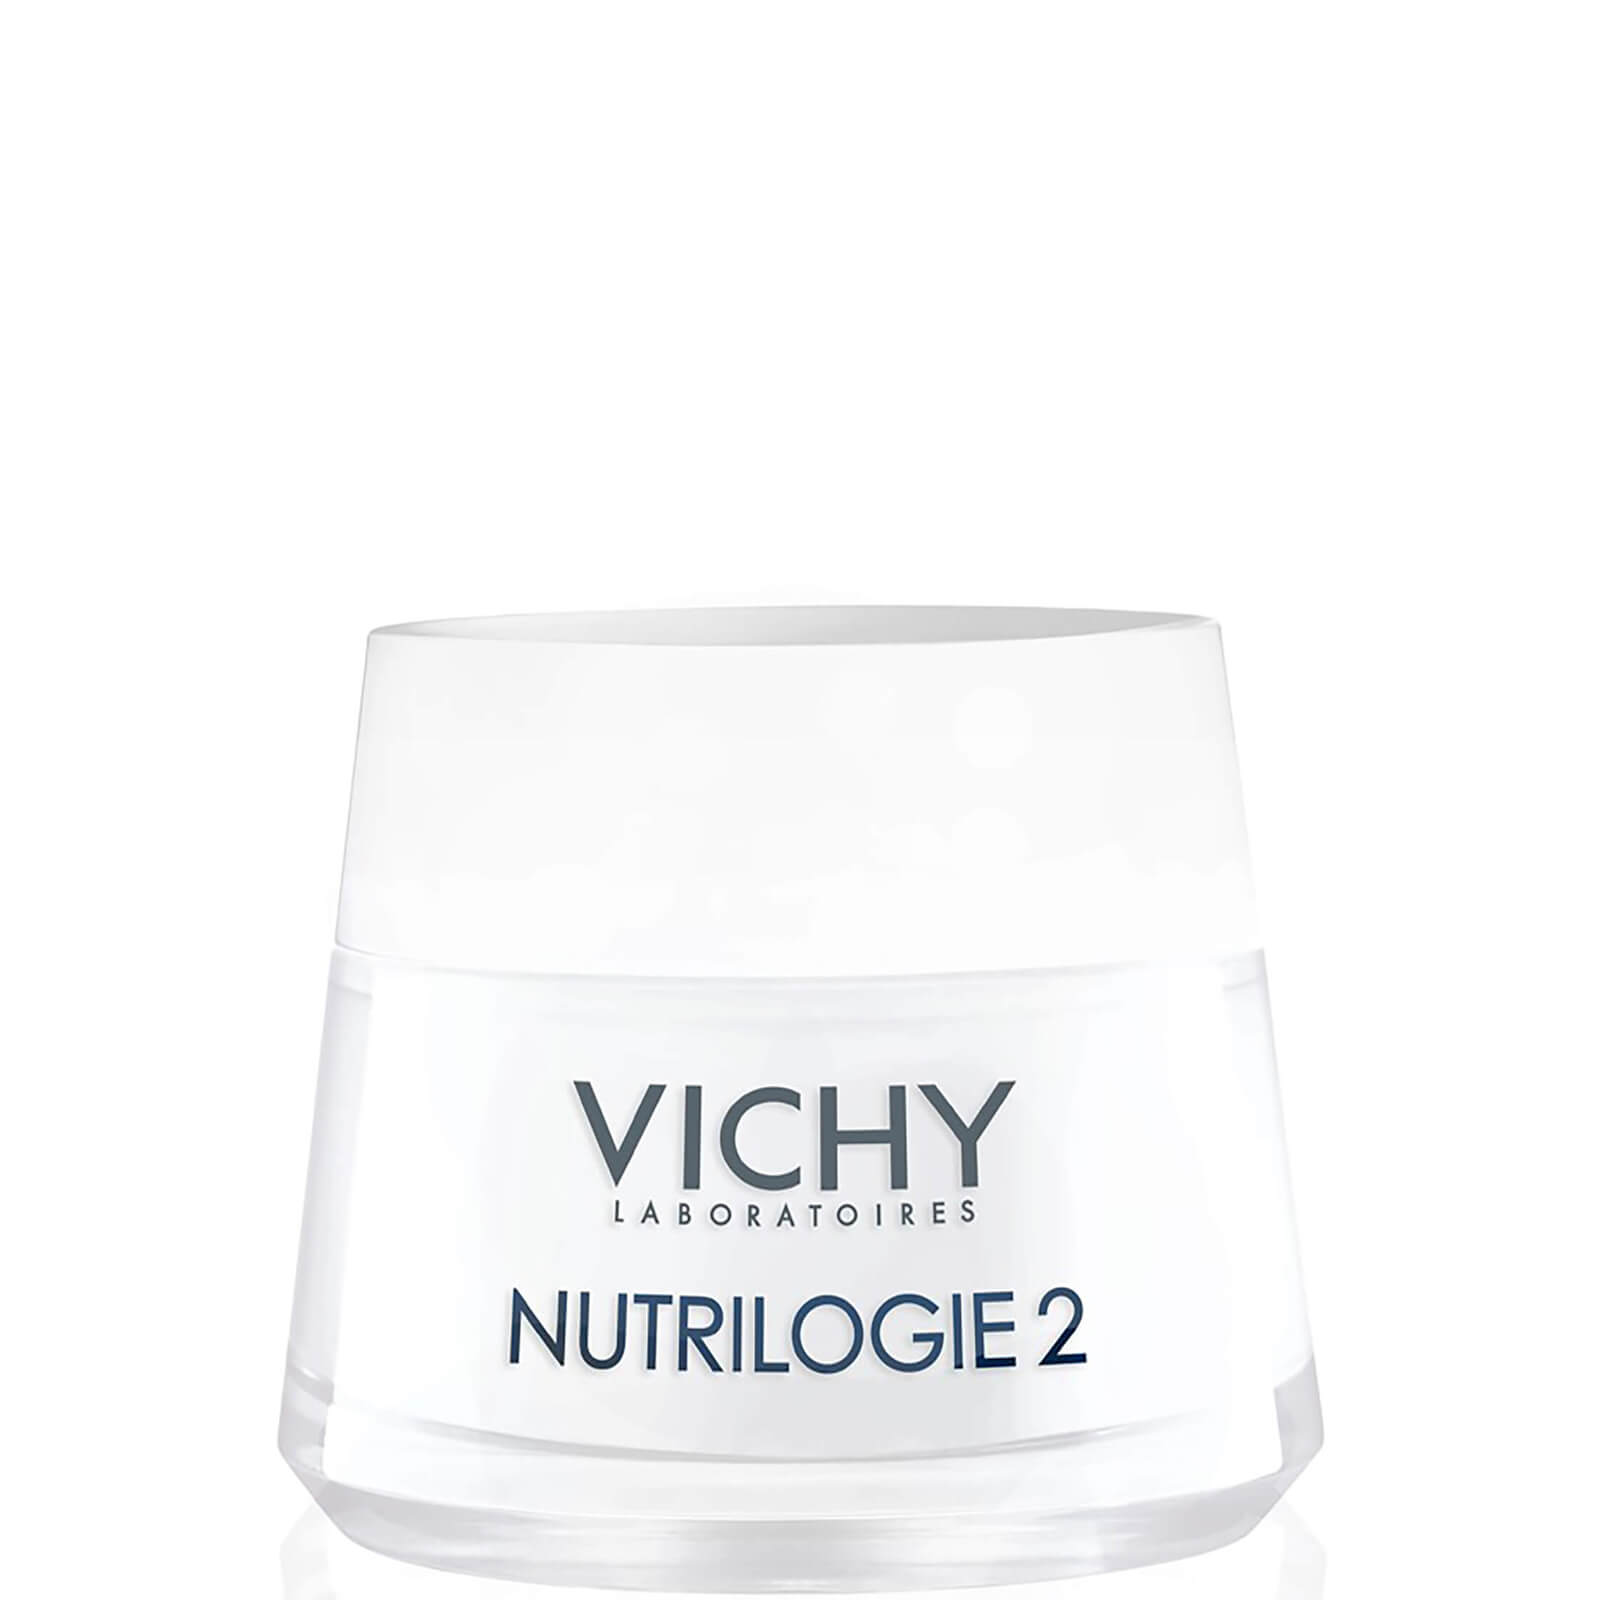 Photos - Cream / Lotion Vichy Nutrilogie 2 Intense Day Cream for Very Dry Skin 50ml M5061004 